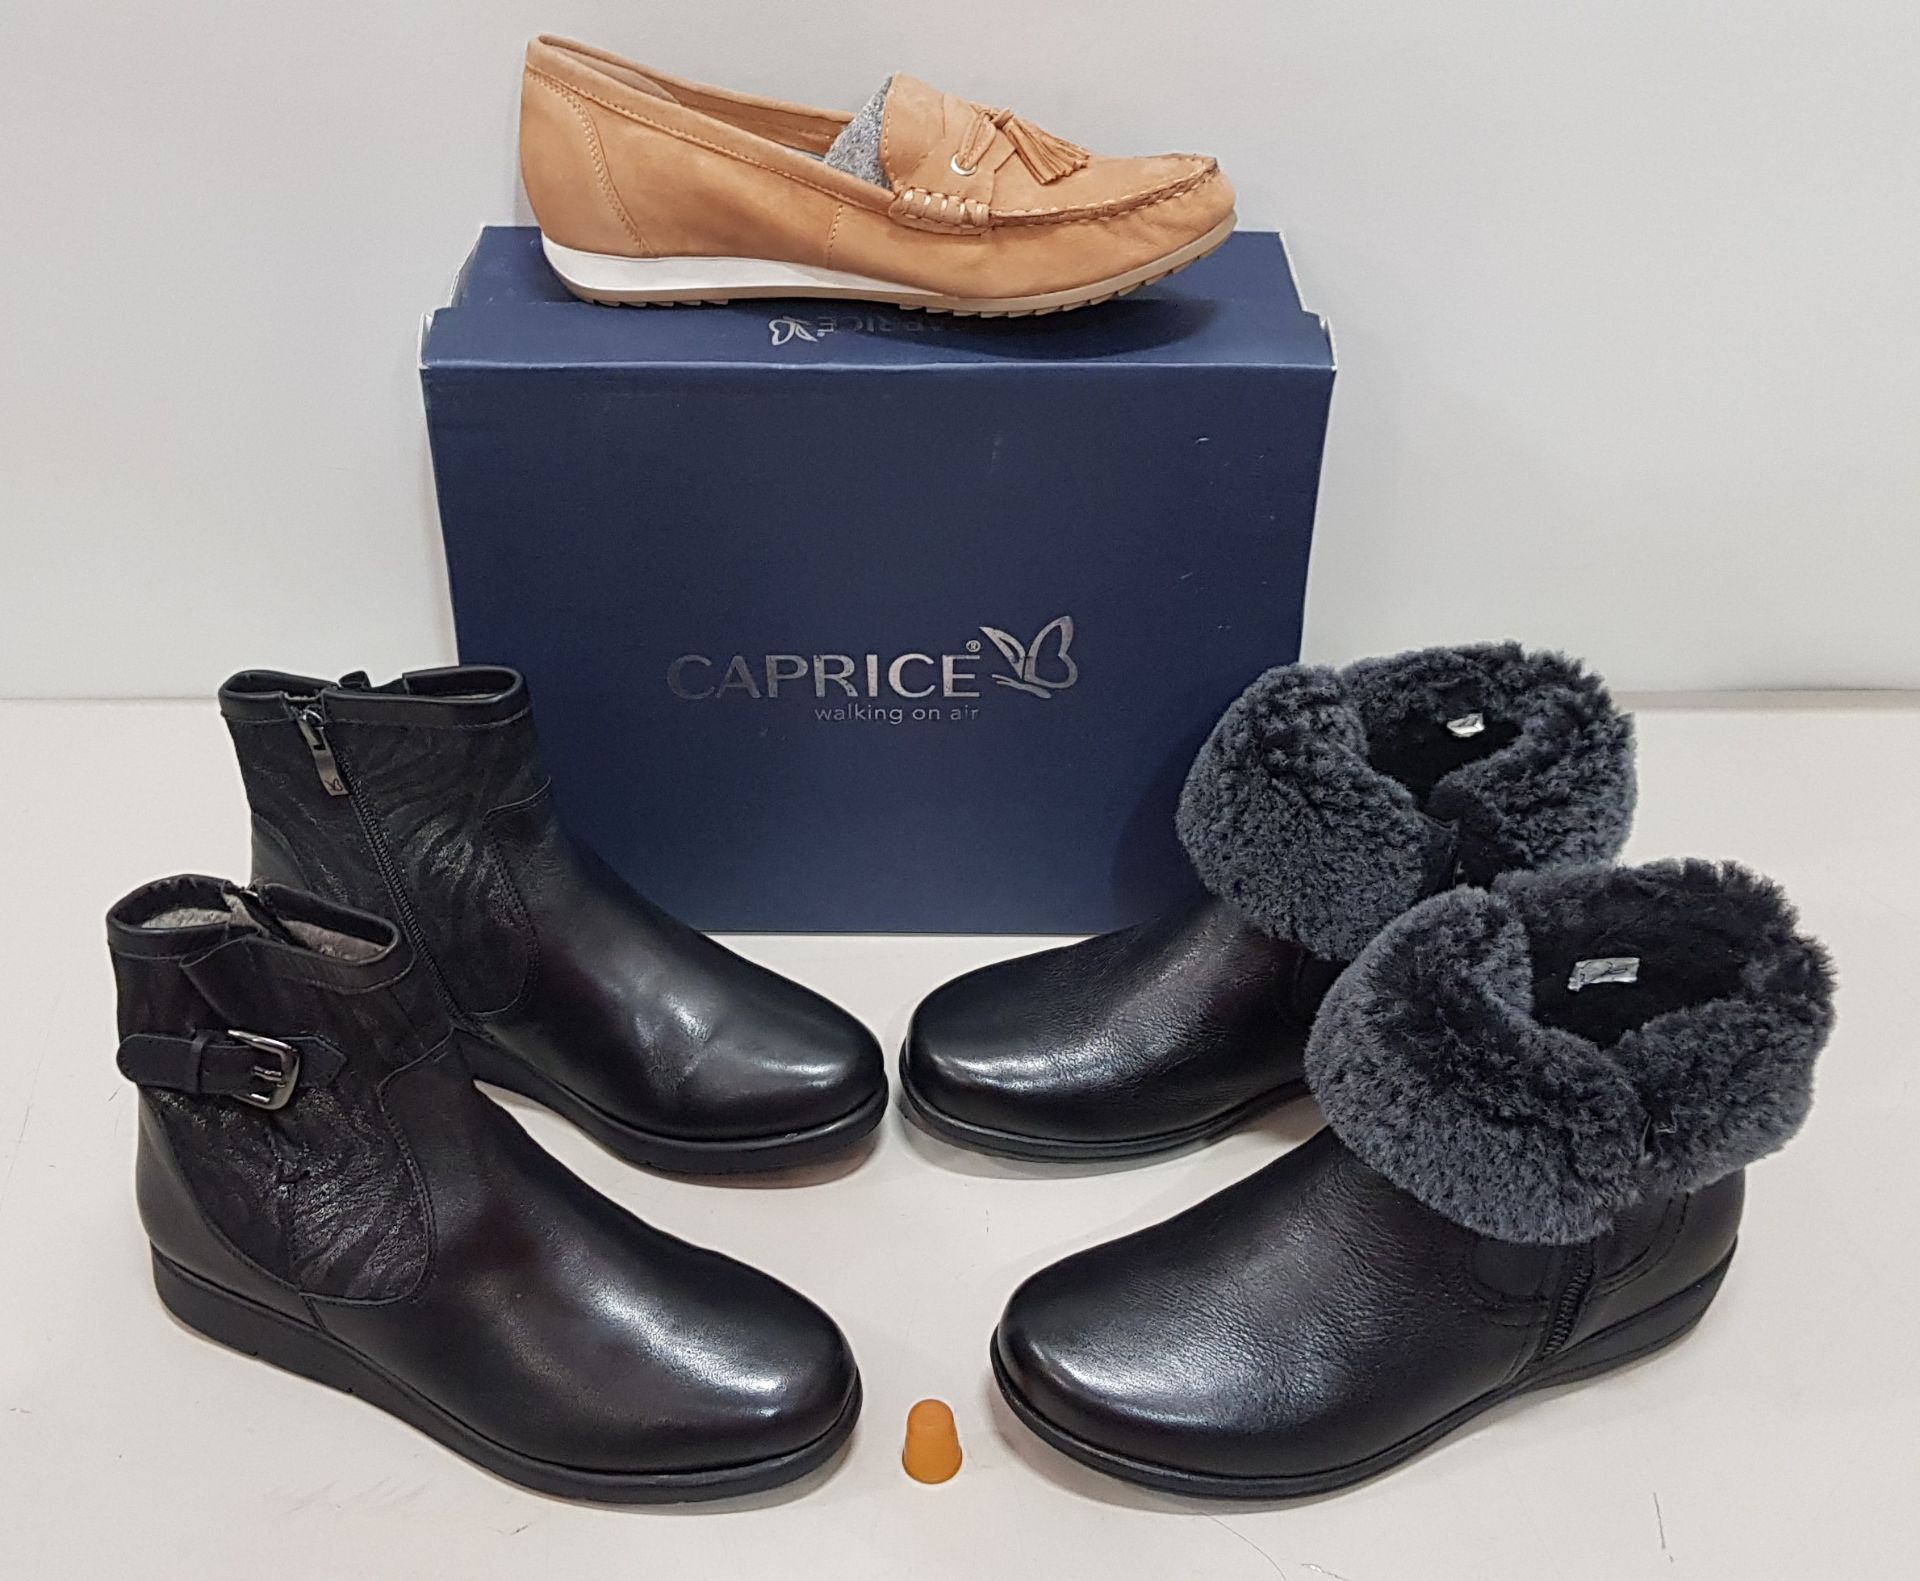 5 X BRAND NEW CAPRICE SHOE/BOOT LOT CONTAINING 2 X CAPRICE NAPPA LEATHER ANKLE BOOTS IN BLACK SIZE 4